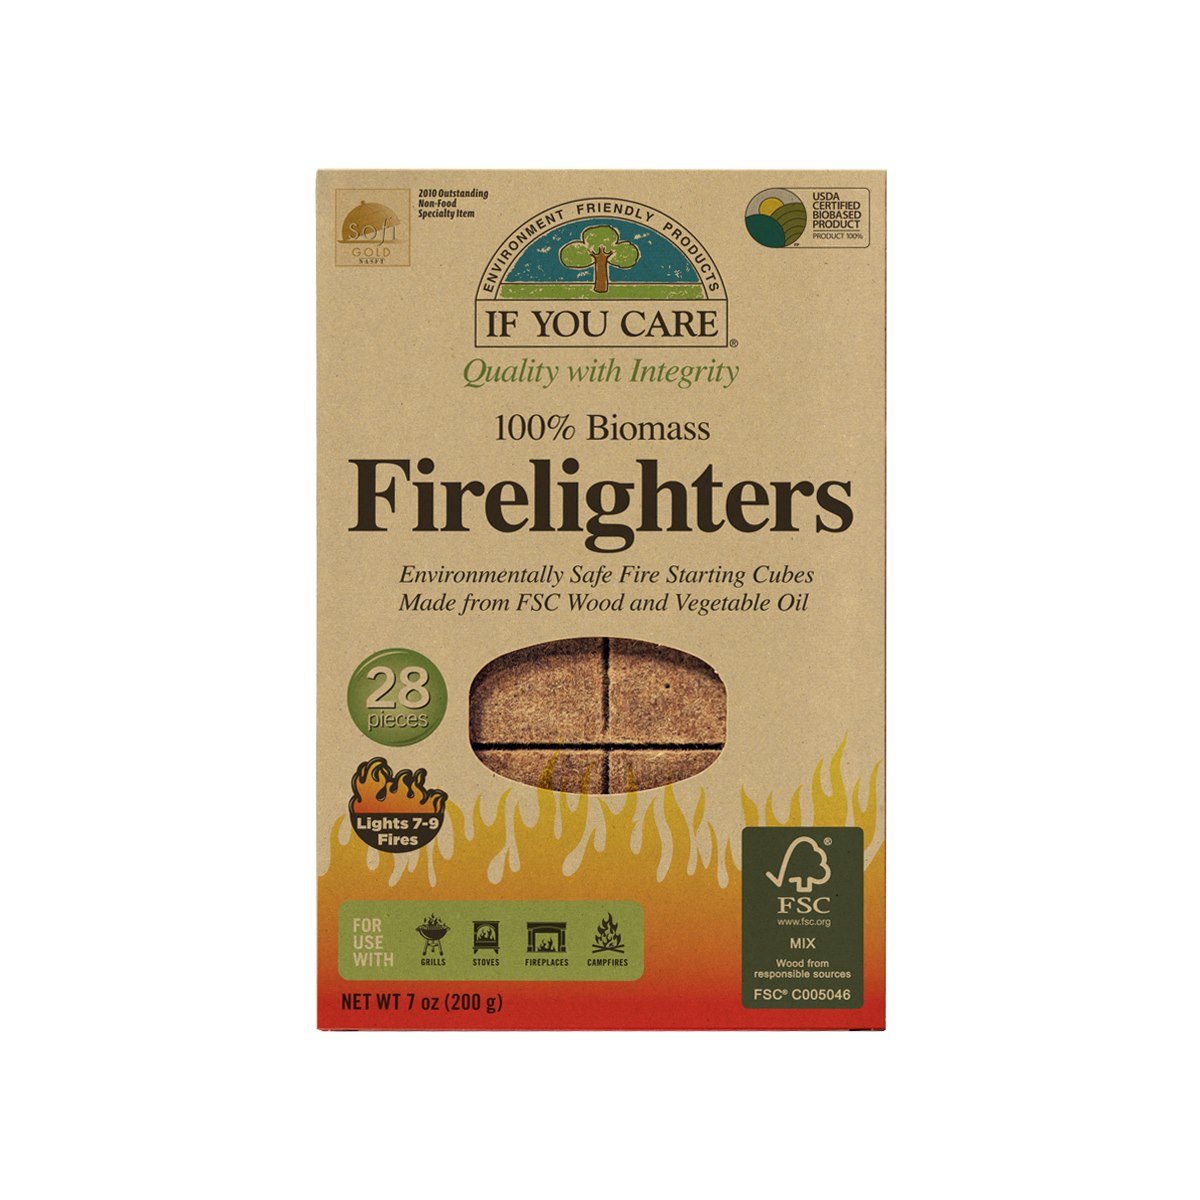 If You Care Firelighters Pack of 28